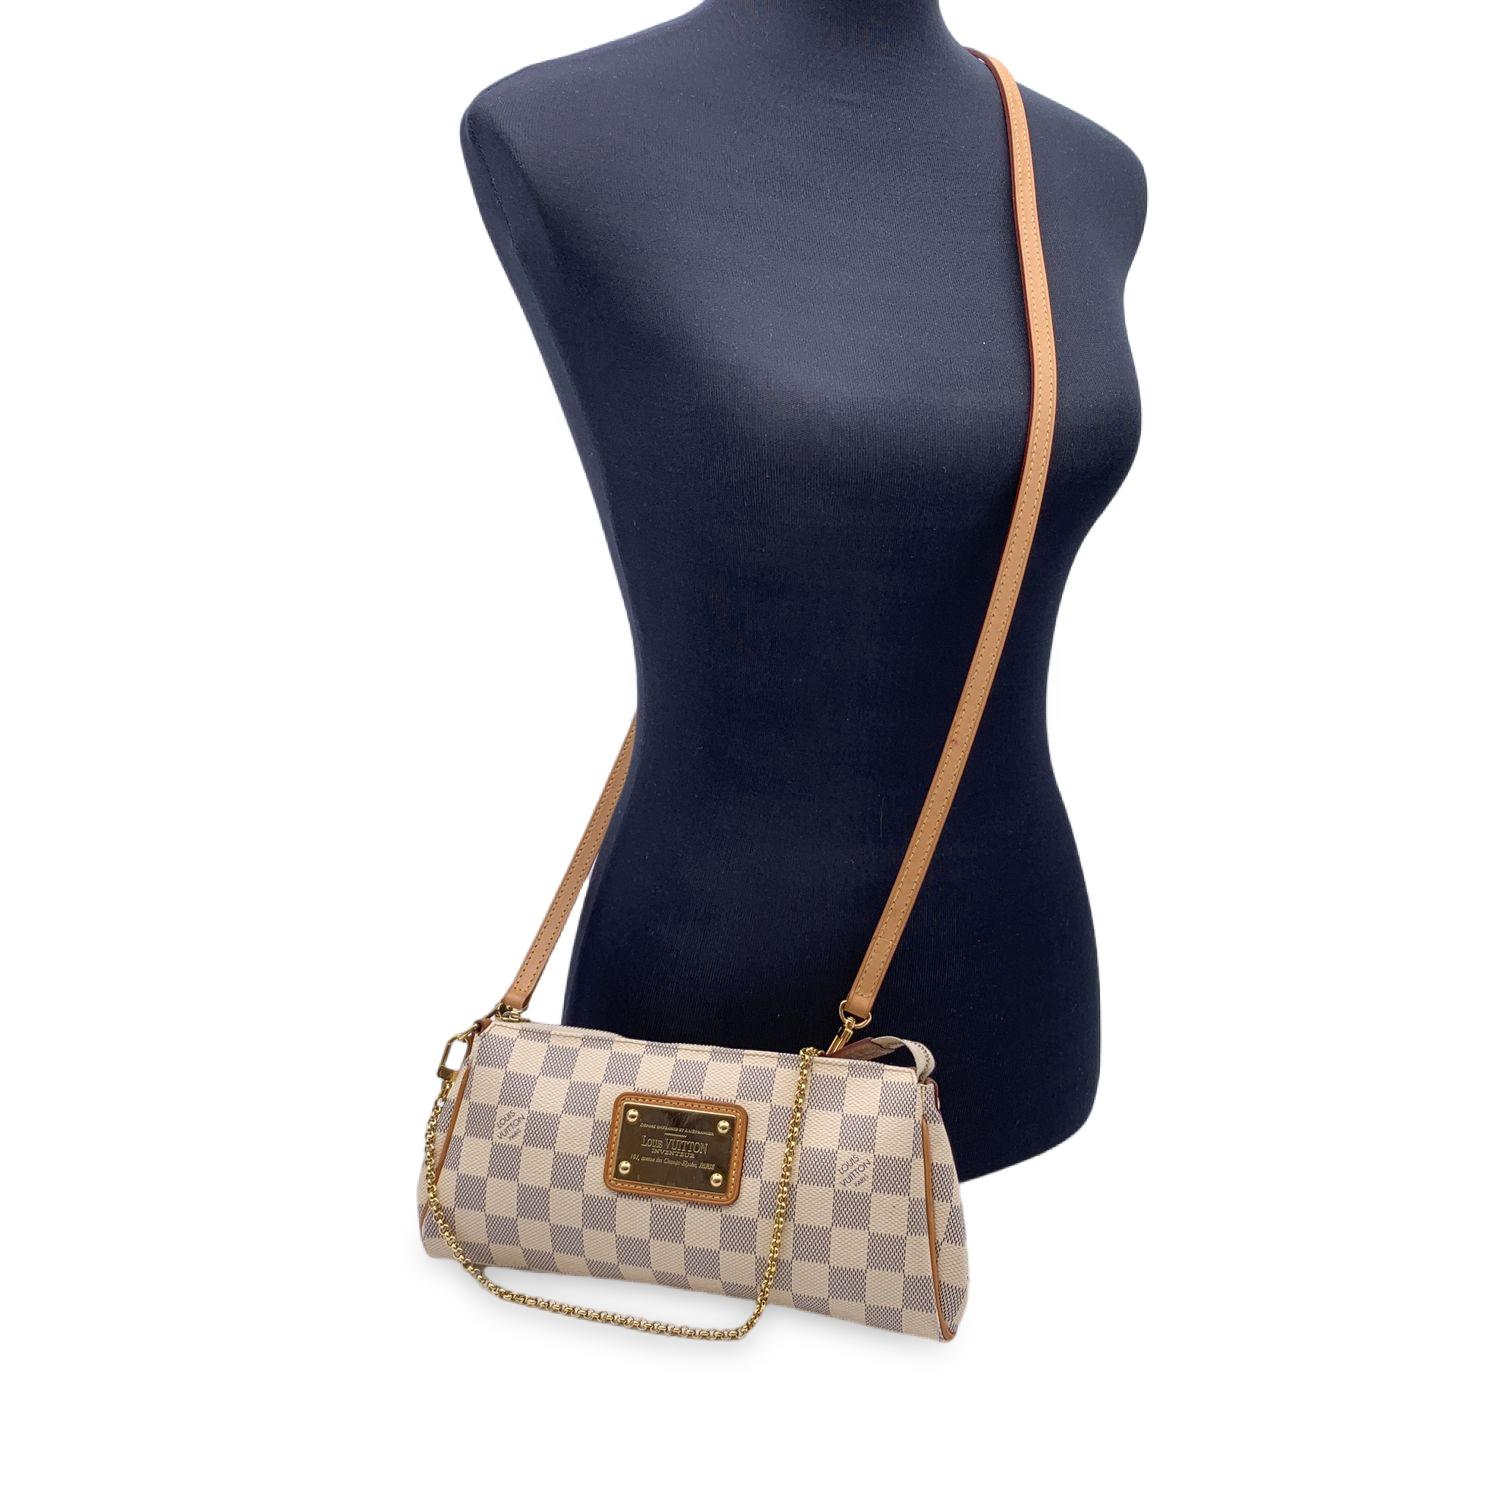 Louis Vuitton Pochette 'Eva' in Damier Azur canvas. Gold metal 'Louis Vuitton Inventeur' logo plaque on the front. Upper zipper closure. Fabric lining. It has a chain shoulder strap and a longer leather one, so can be worn both over the shoulder and